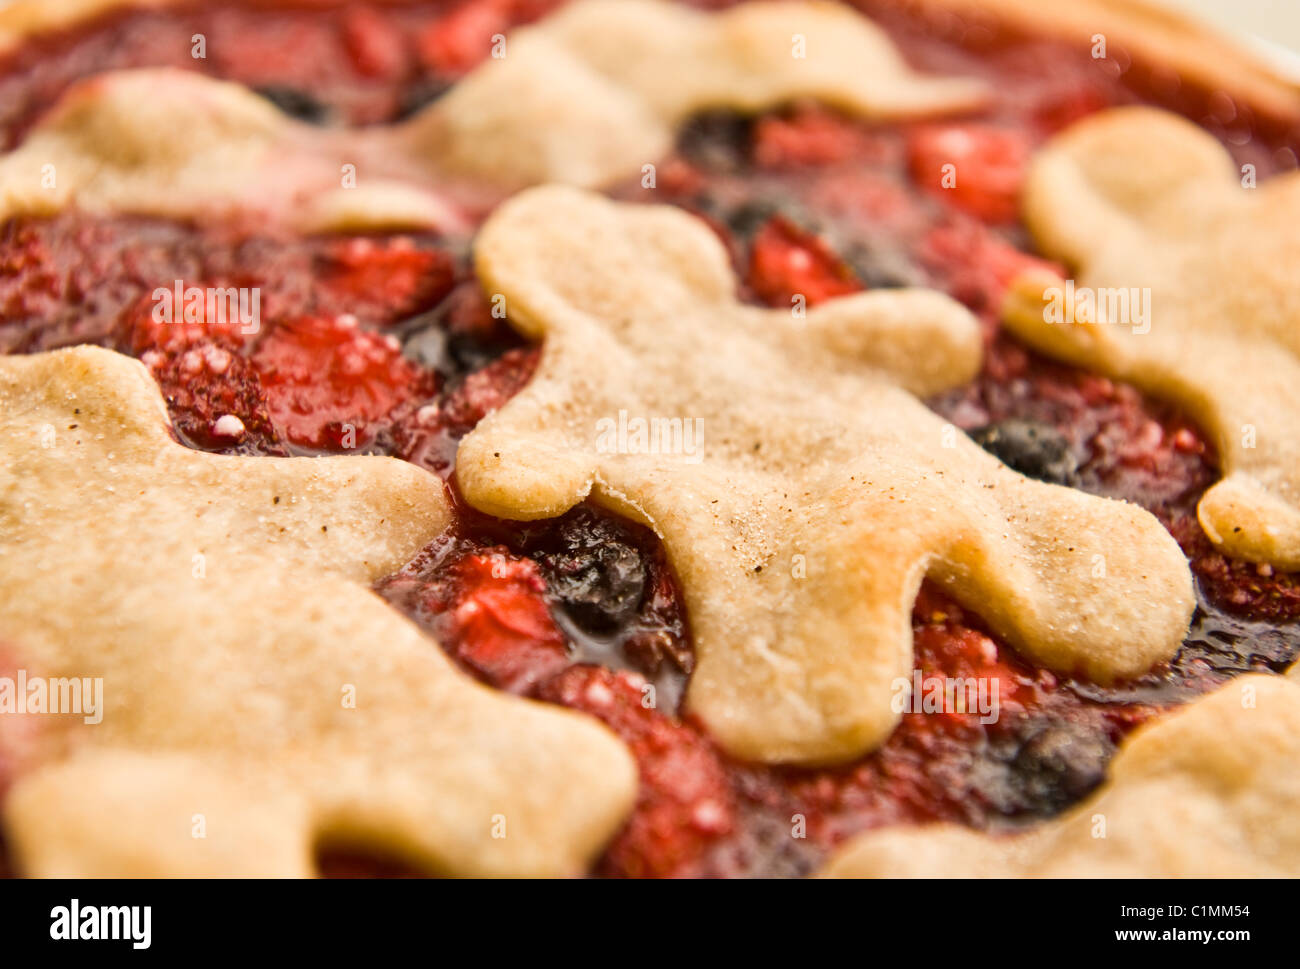 Close-up of a homemade strawberry and blueberry pie with people shaped pastry crust Stock Photo